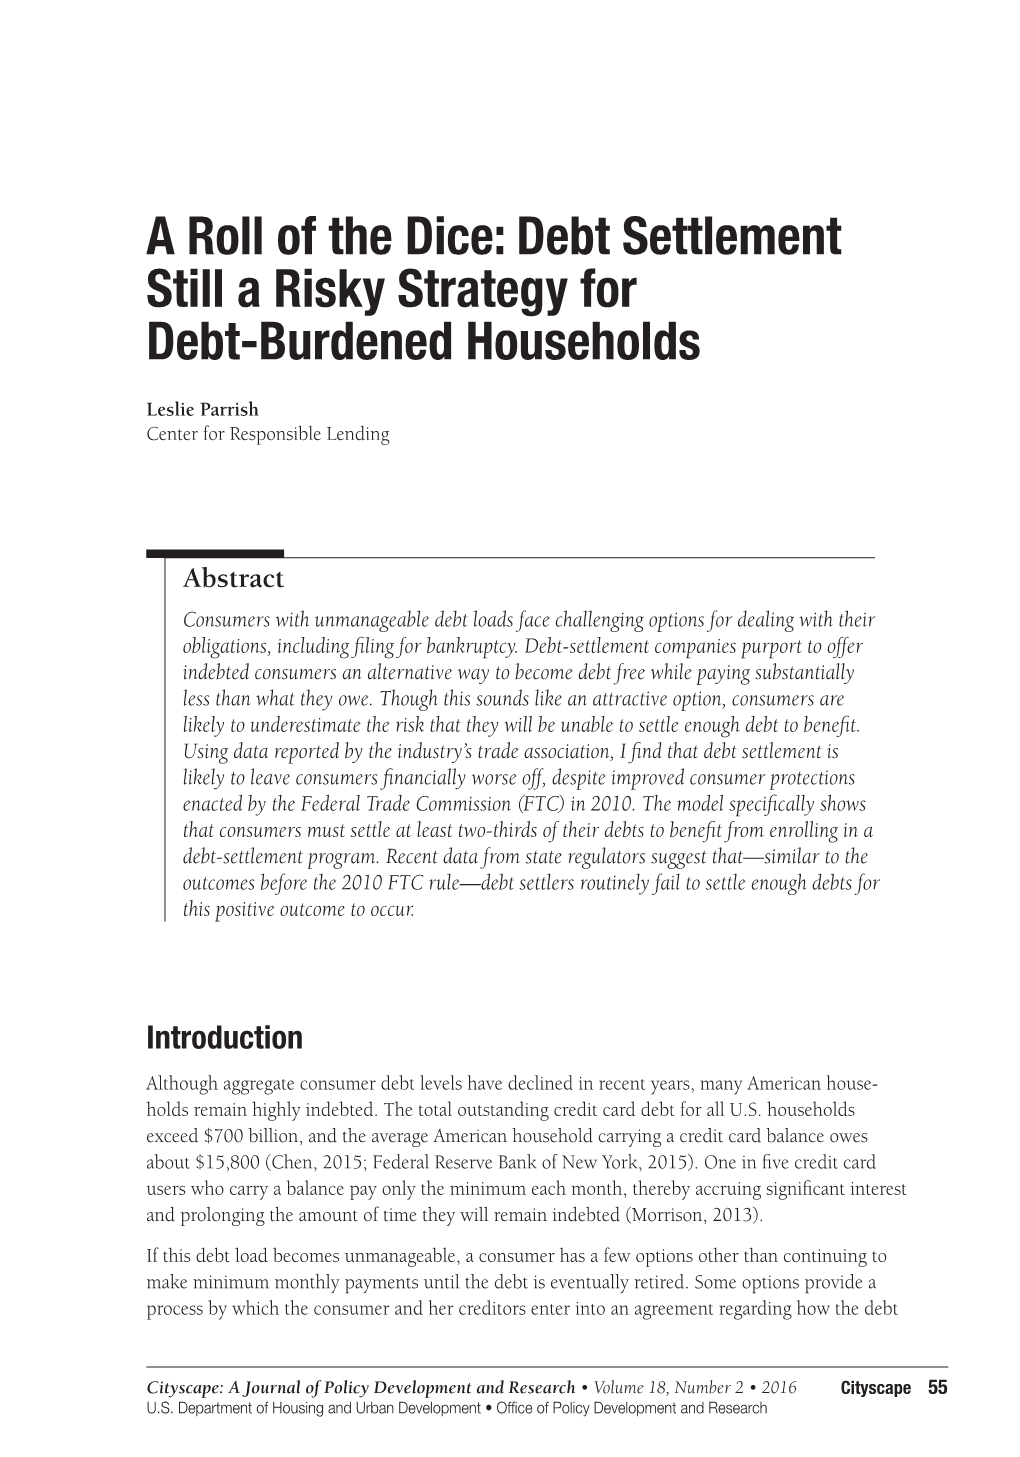 A Roll of the Dice: Debt Settlement Still a Risky Strategy for Debt-Burdened Households